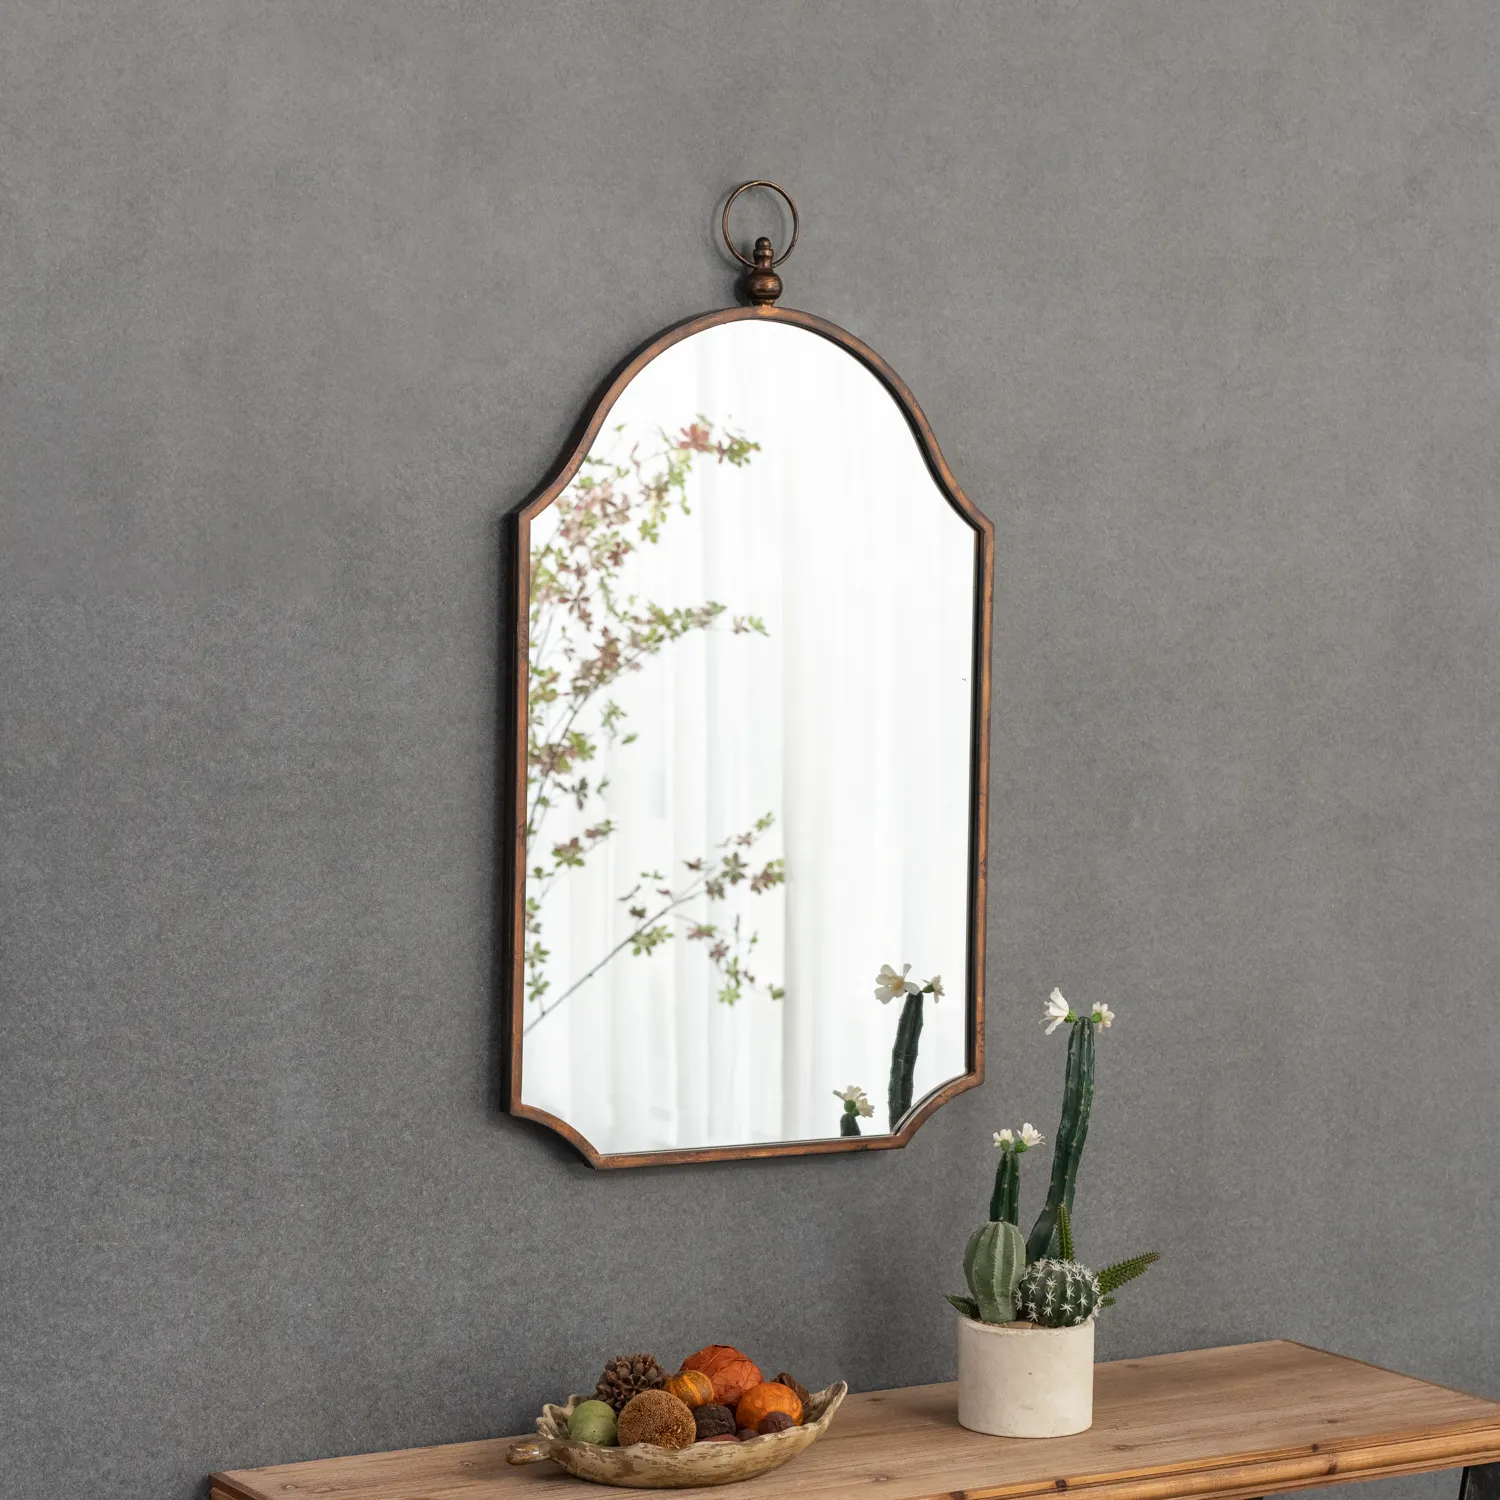 YUNFEI gold plated antique designer wall mirror with top decoration for entry way metal wood material hot sale mirrorsold